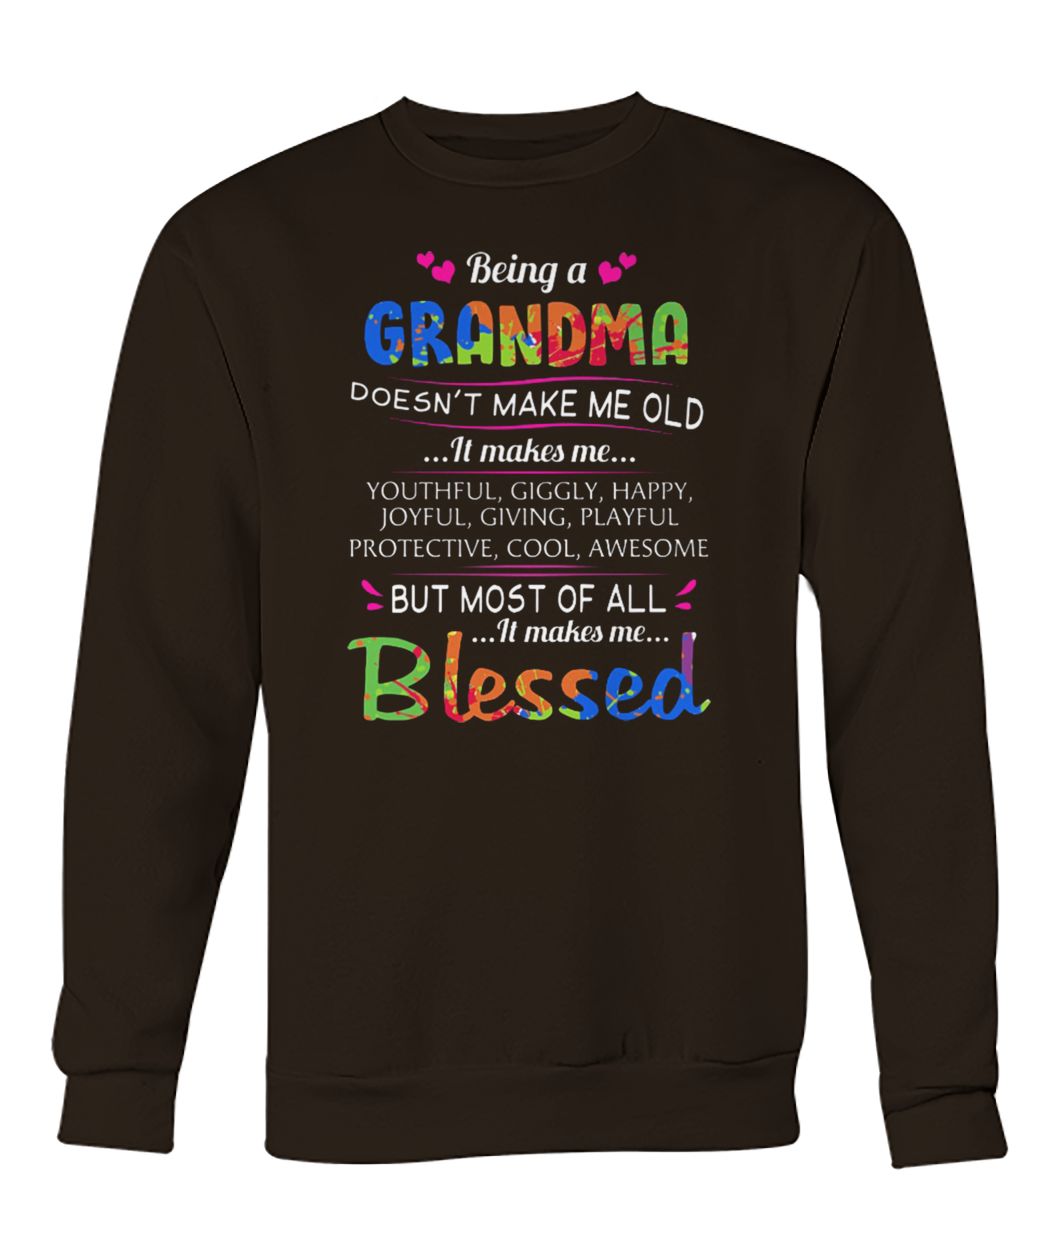 Being a grandma doesn't make me old it makes me youthful giggly happy crew neck sweatshirt